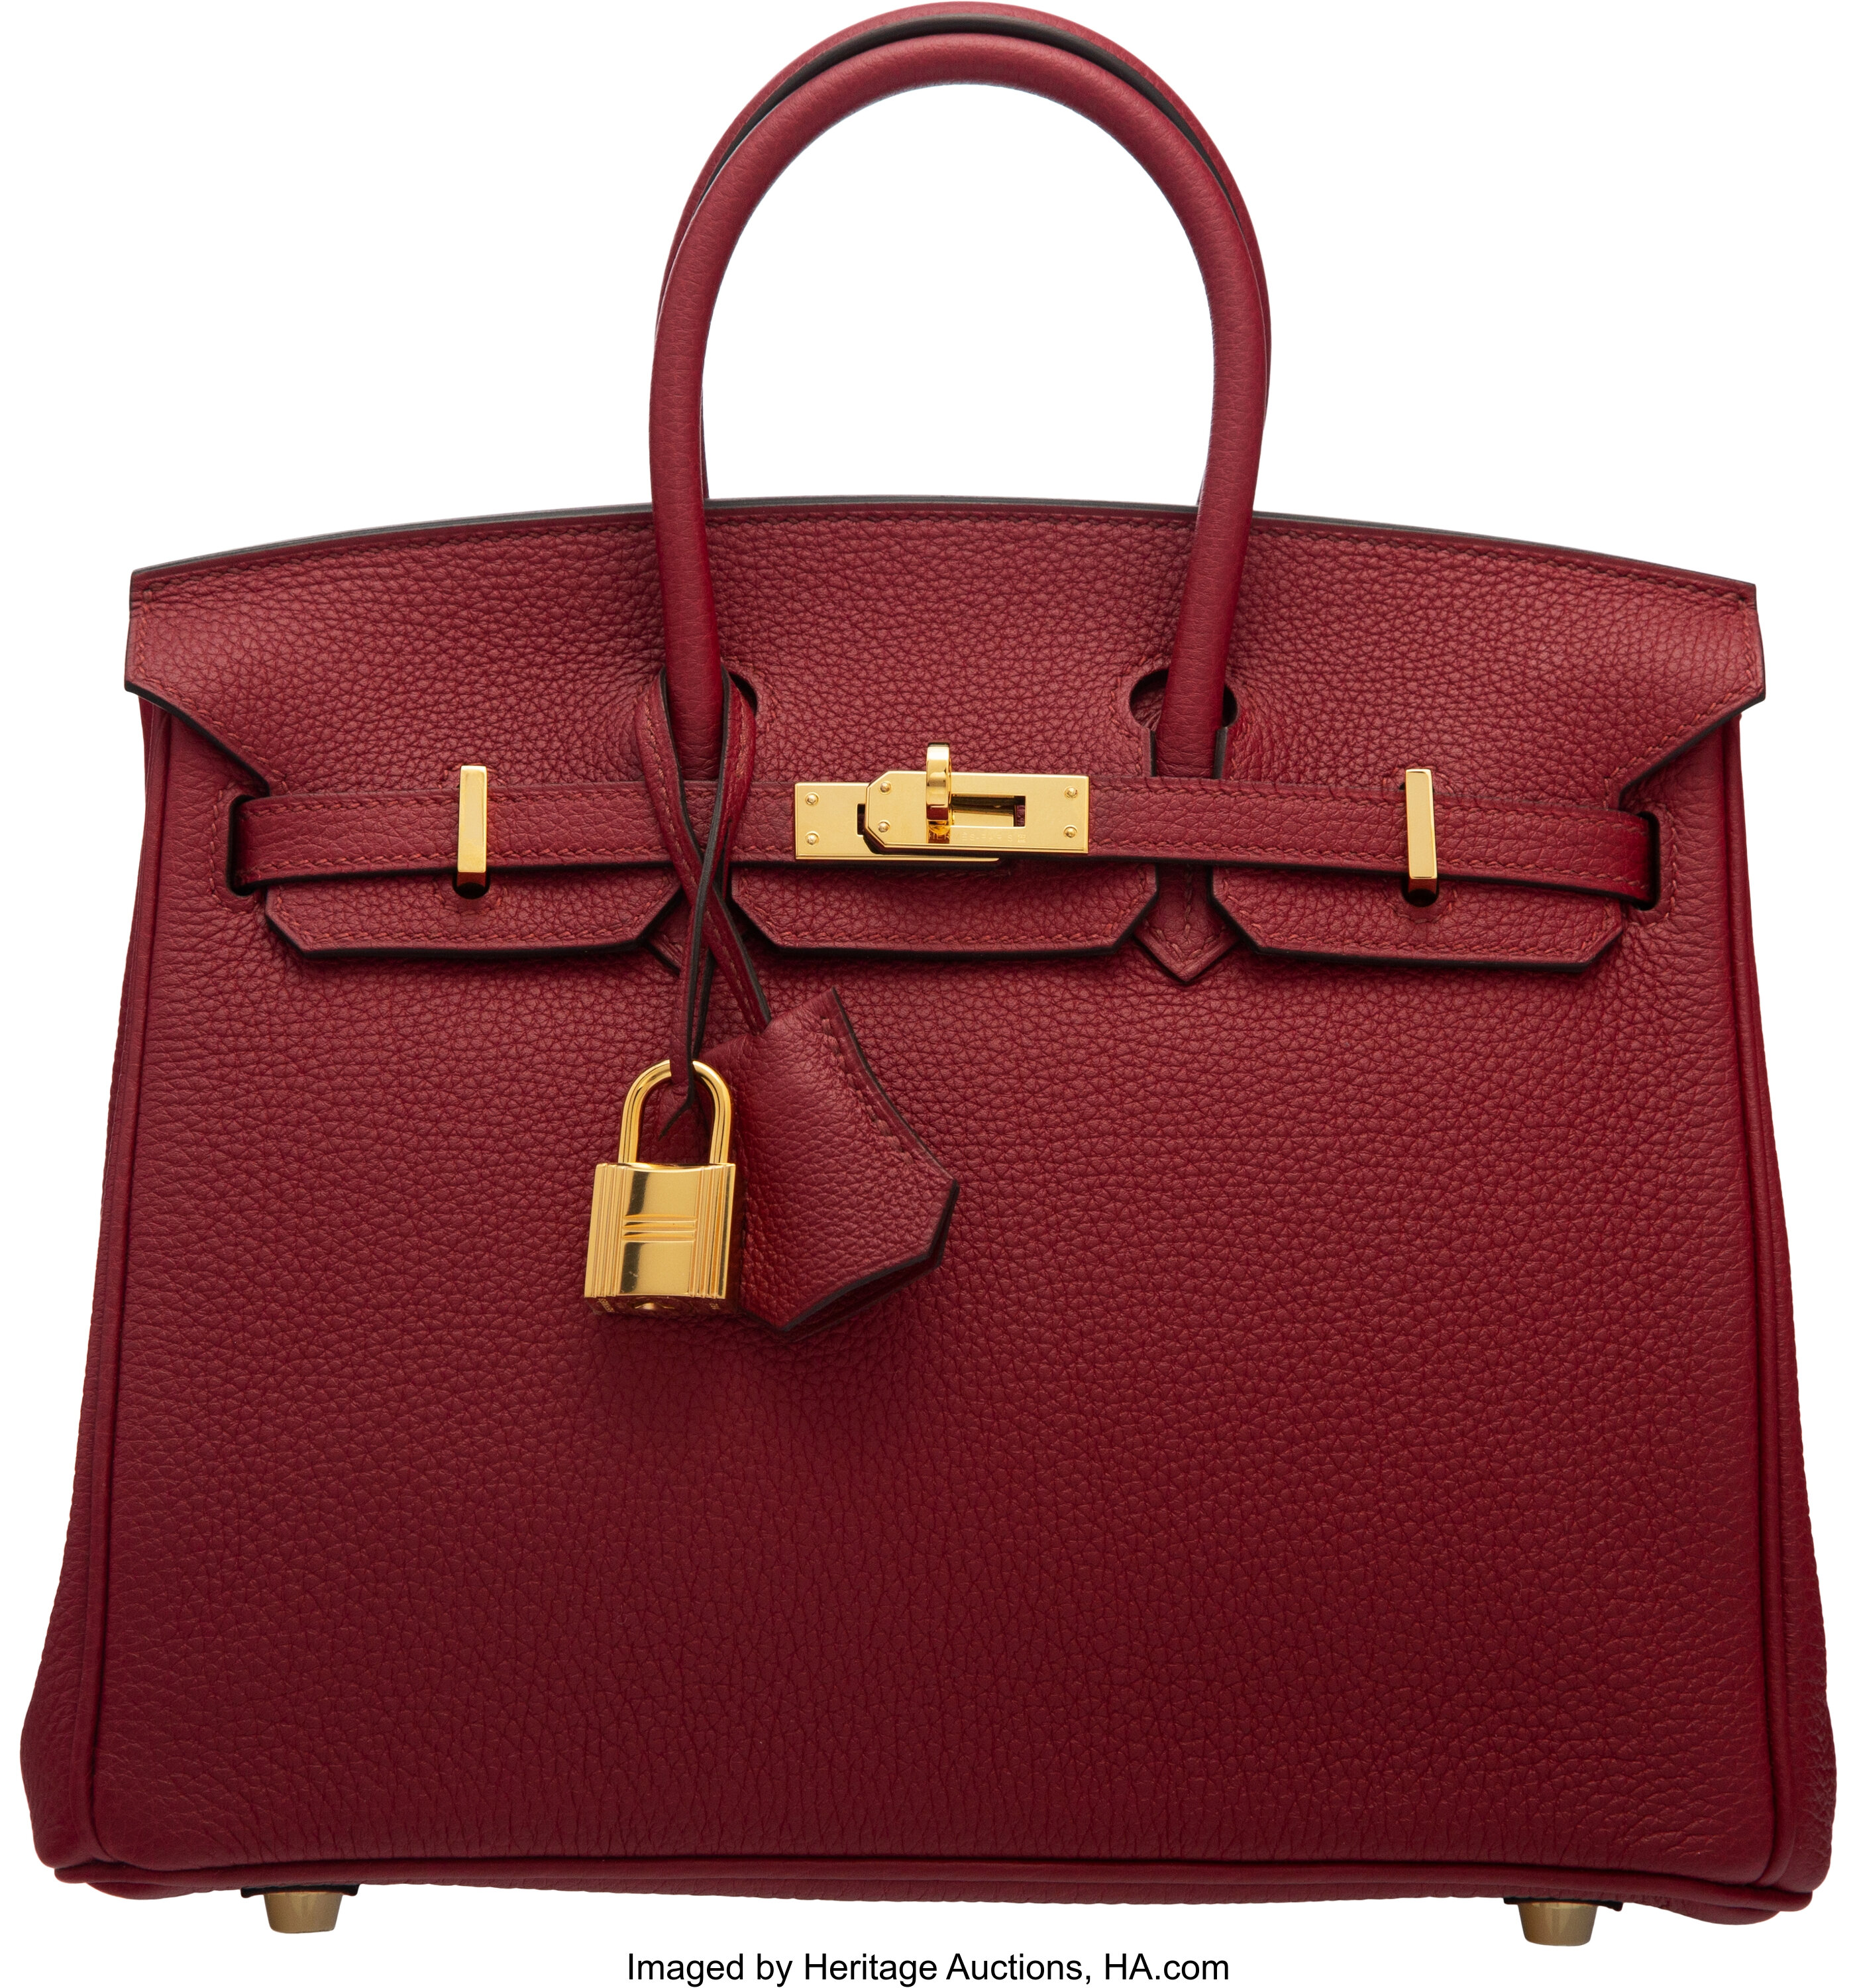 Rouge Grenat Birkin 25cm in Togo Leather with Gold Hardware, 2019, Holiday  Handbags & Accessories, 2020